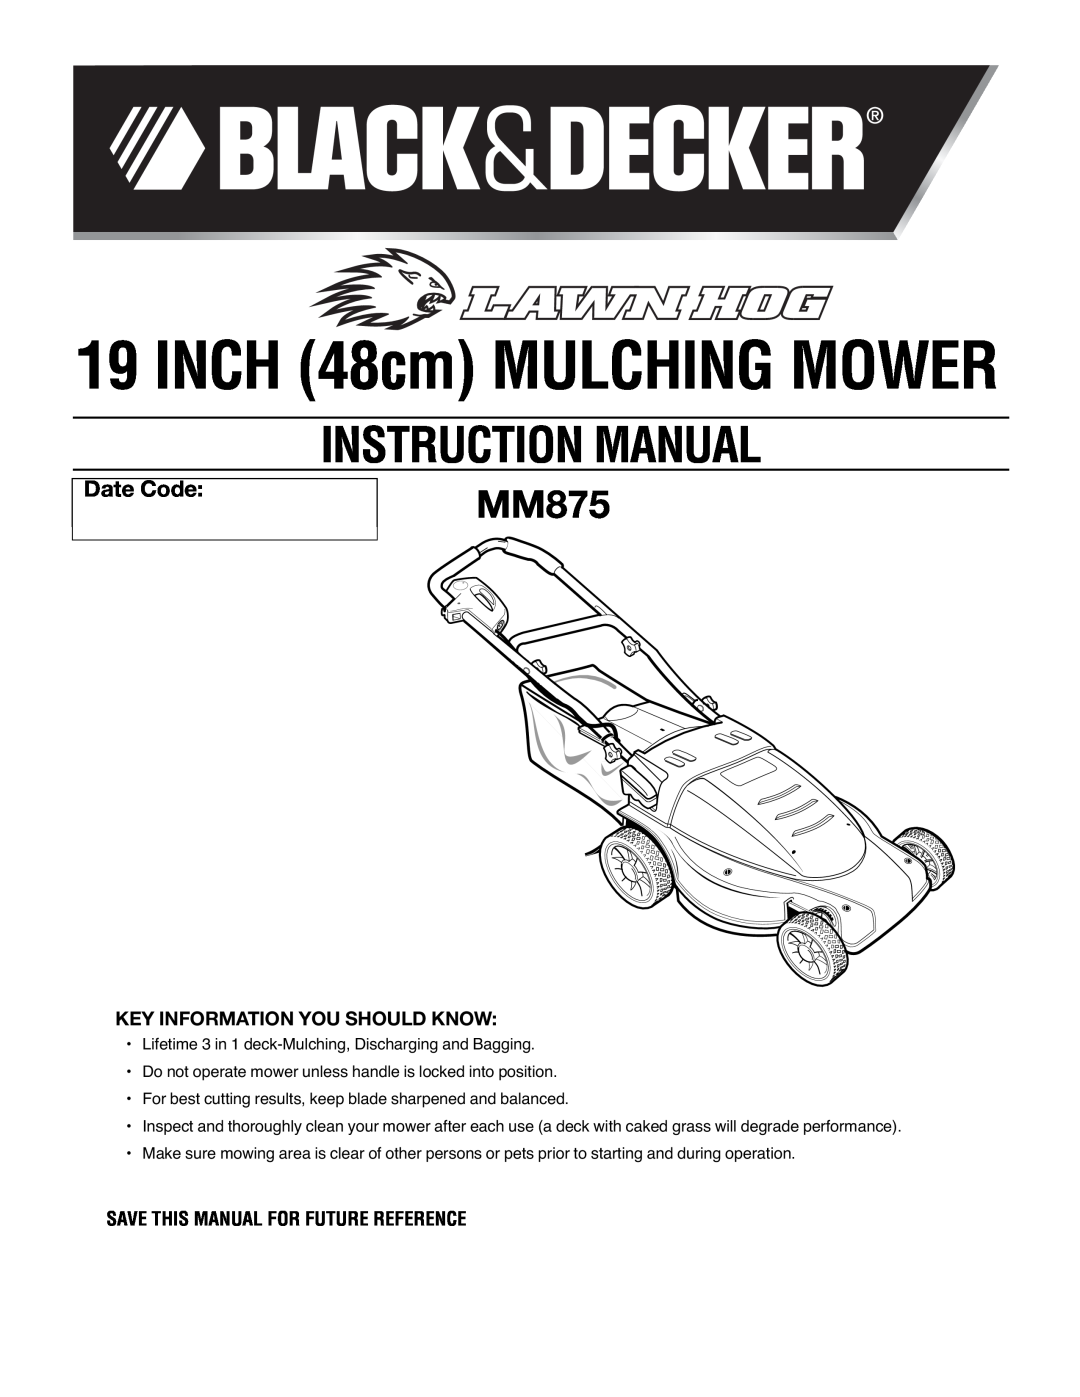 Black & Decker MM875 instruction manual Date Code, Key Information You Should Know, Save This Manual For Future Reference 